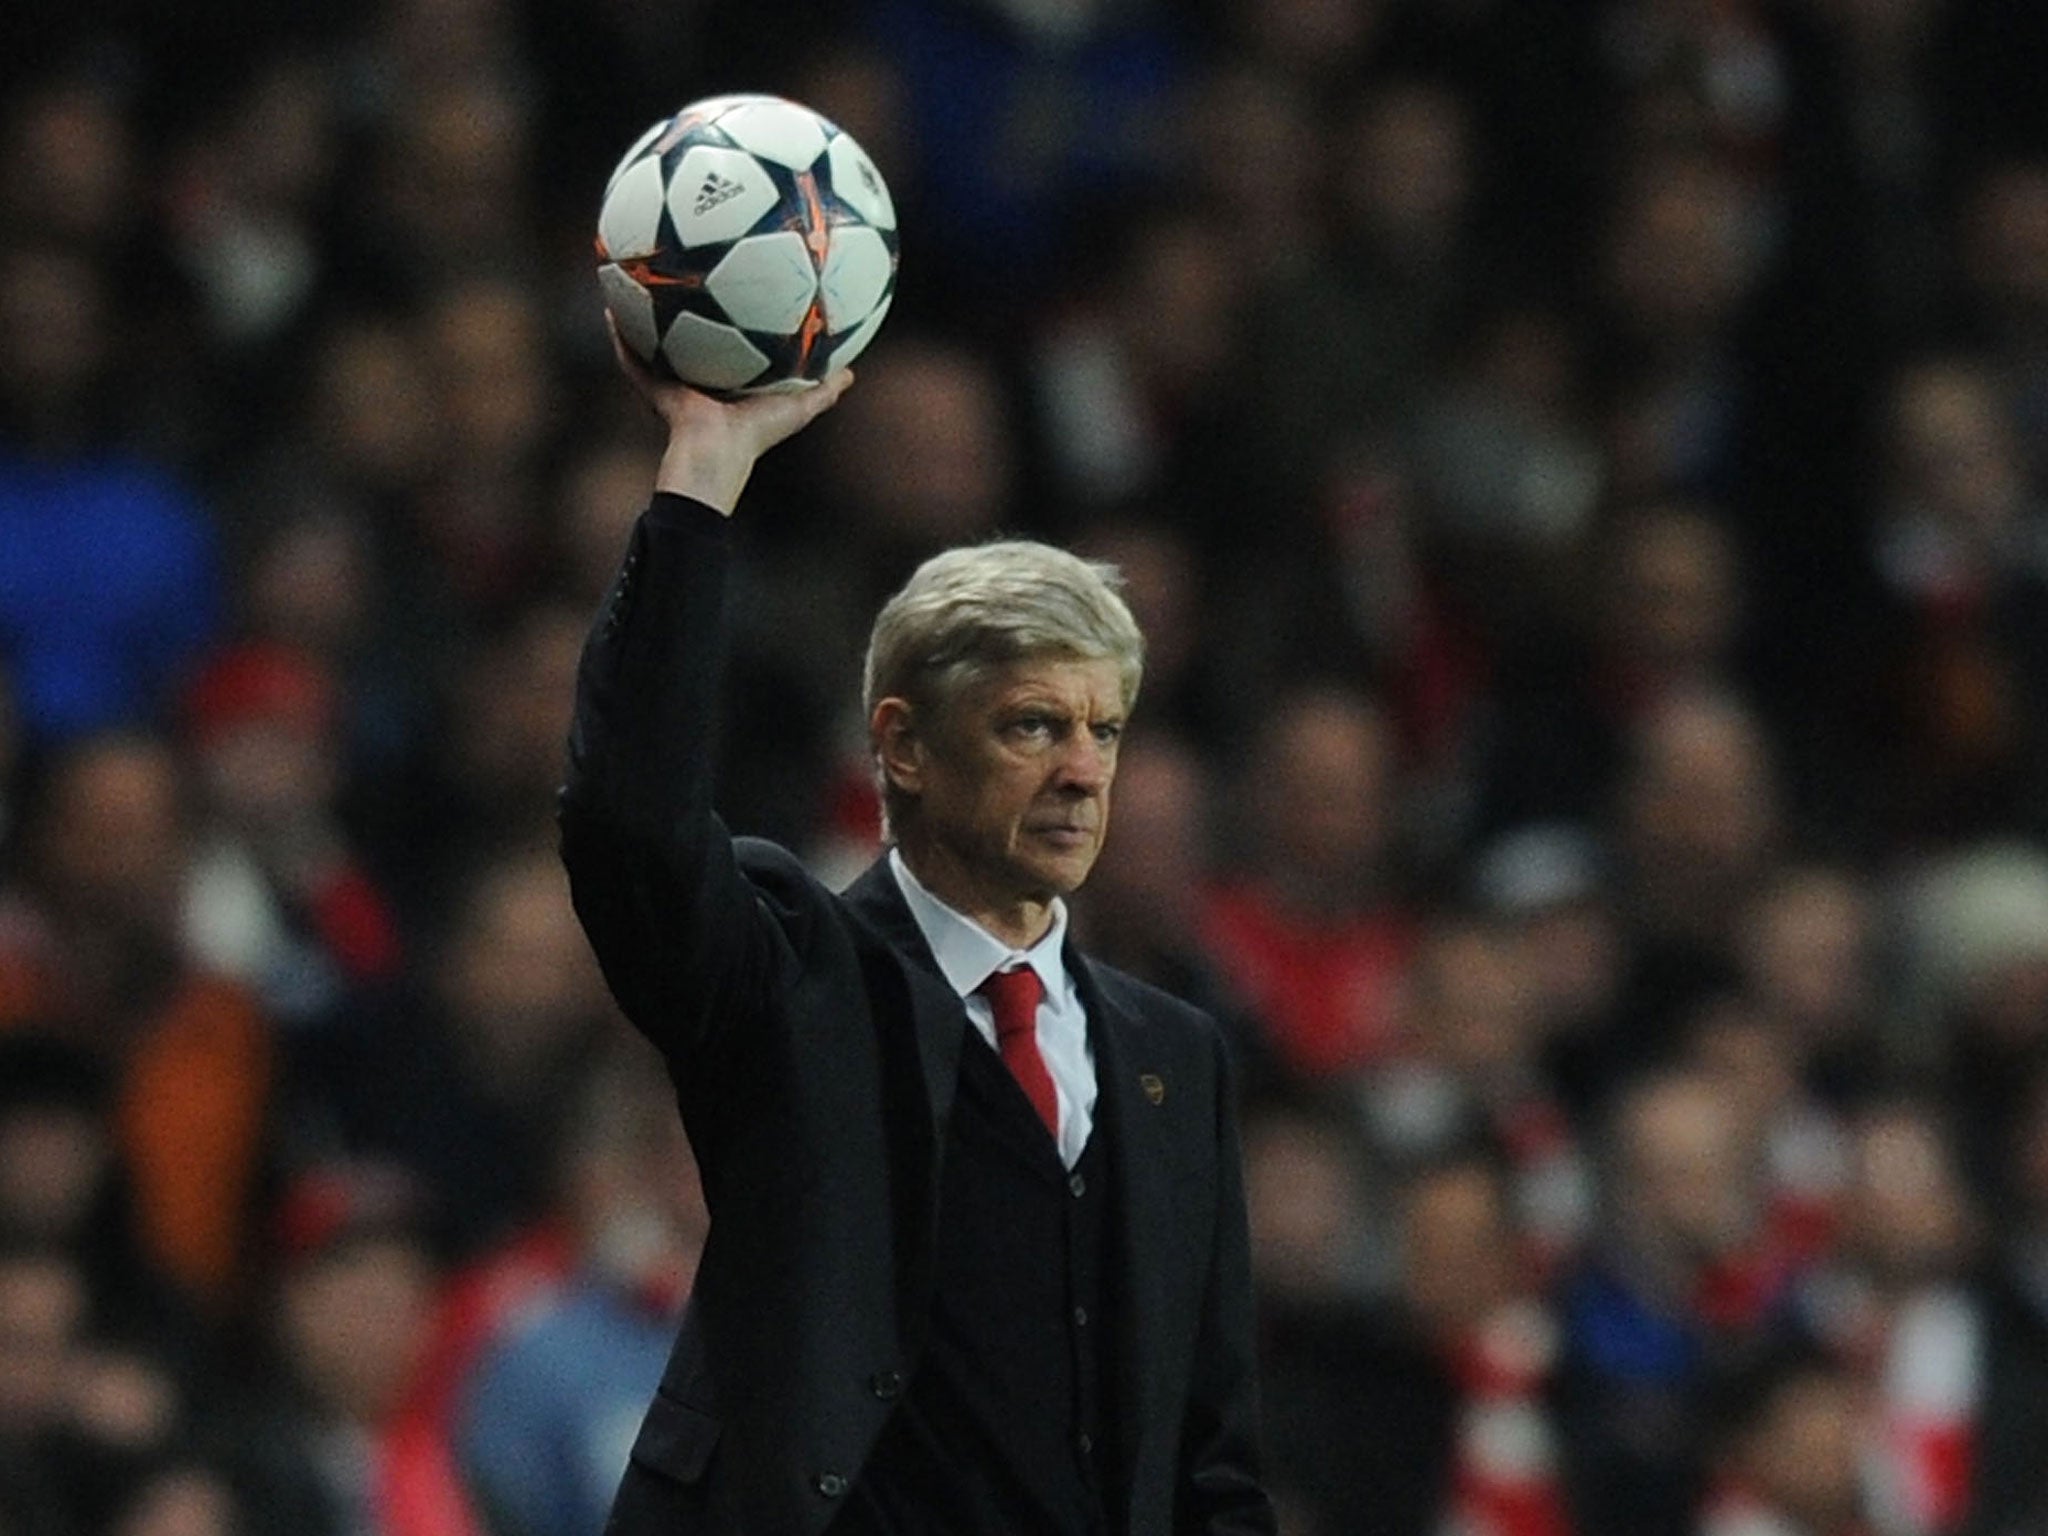 Arsene Wenger throws the ball back into play during Arsenal's 2-0 defeat against Bayern Munich on Wednesday night